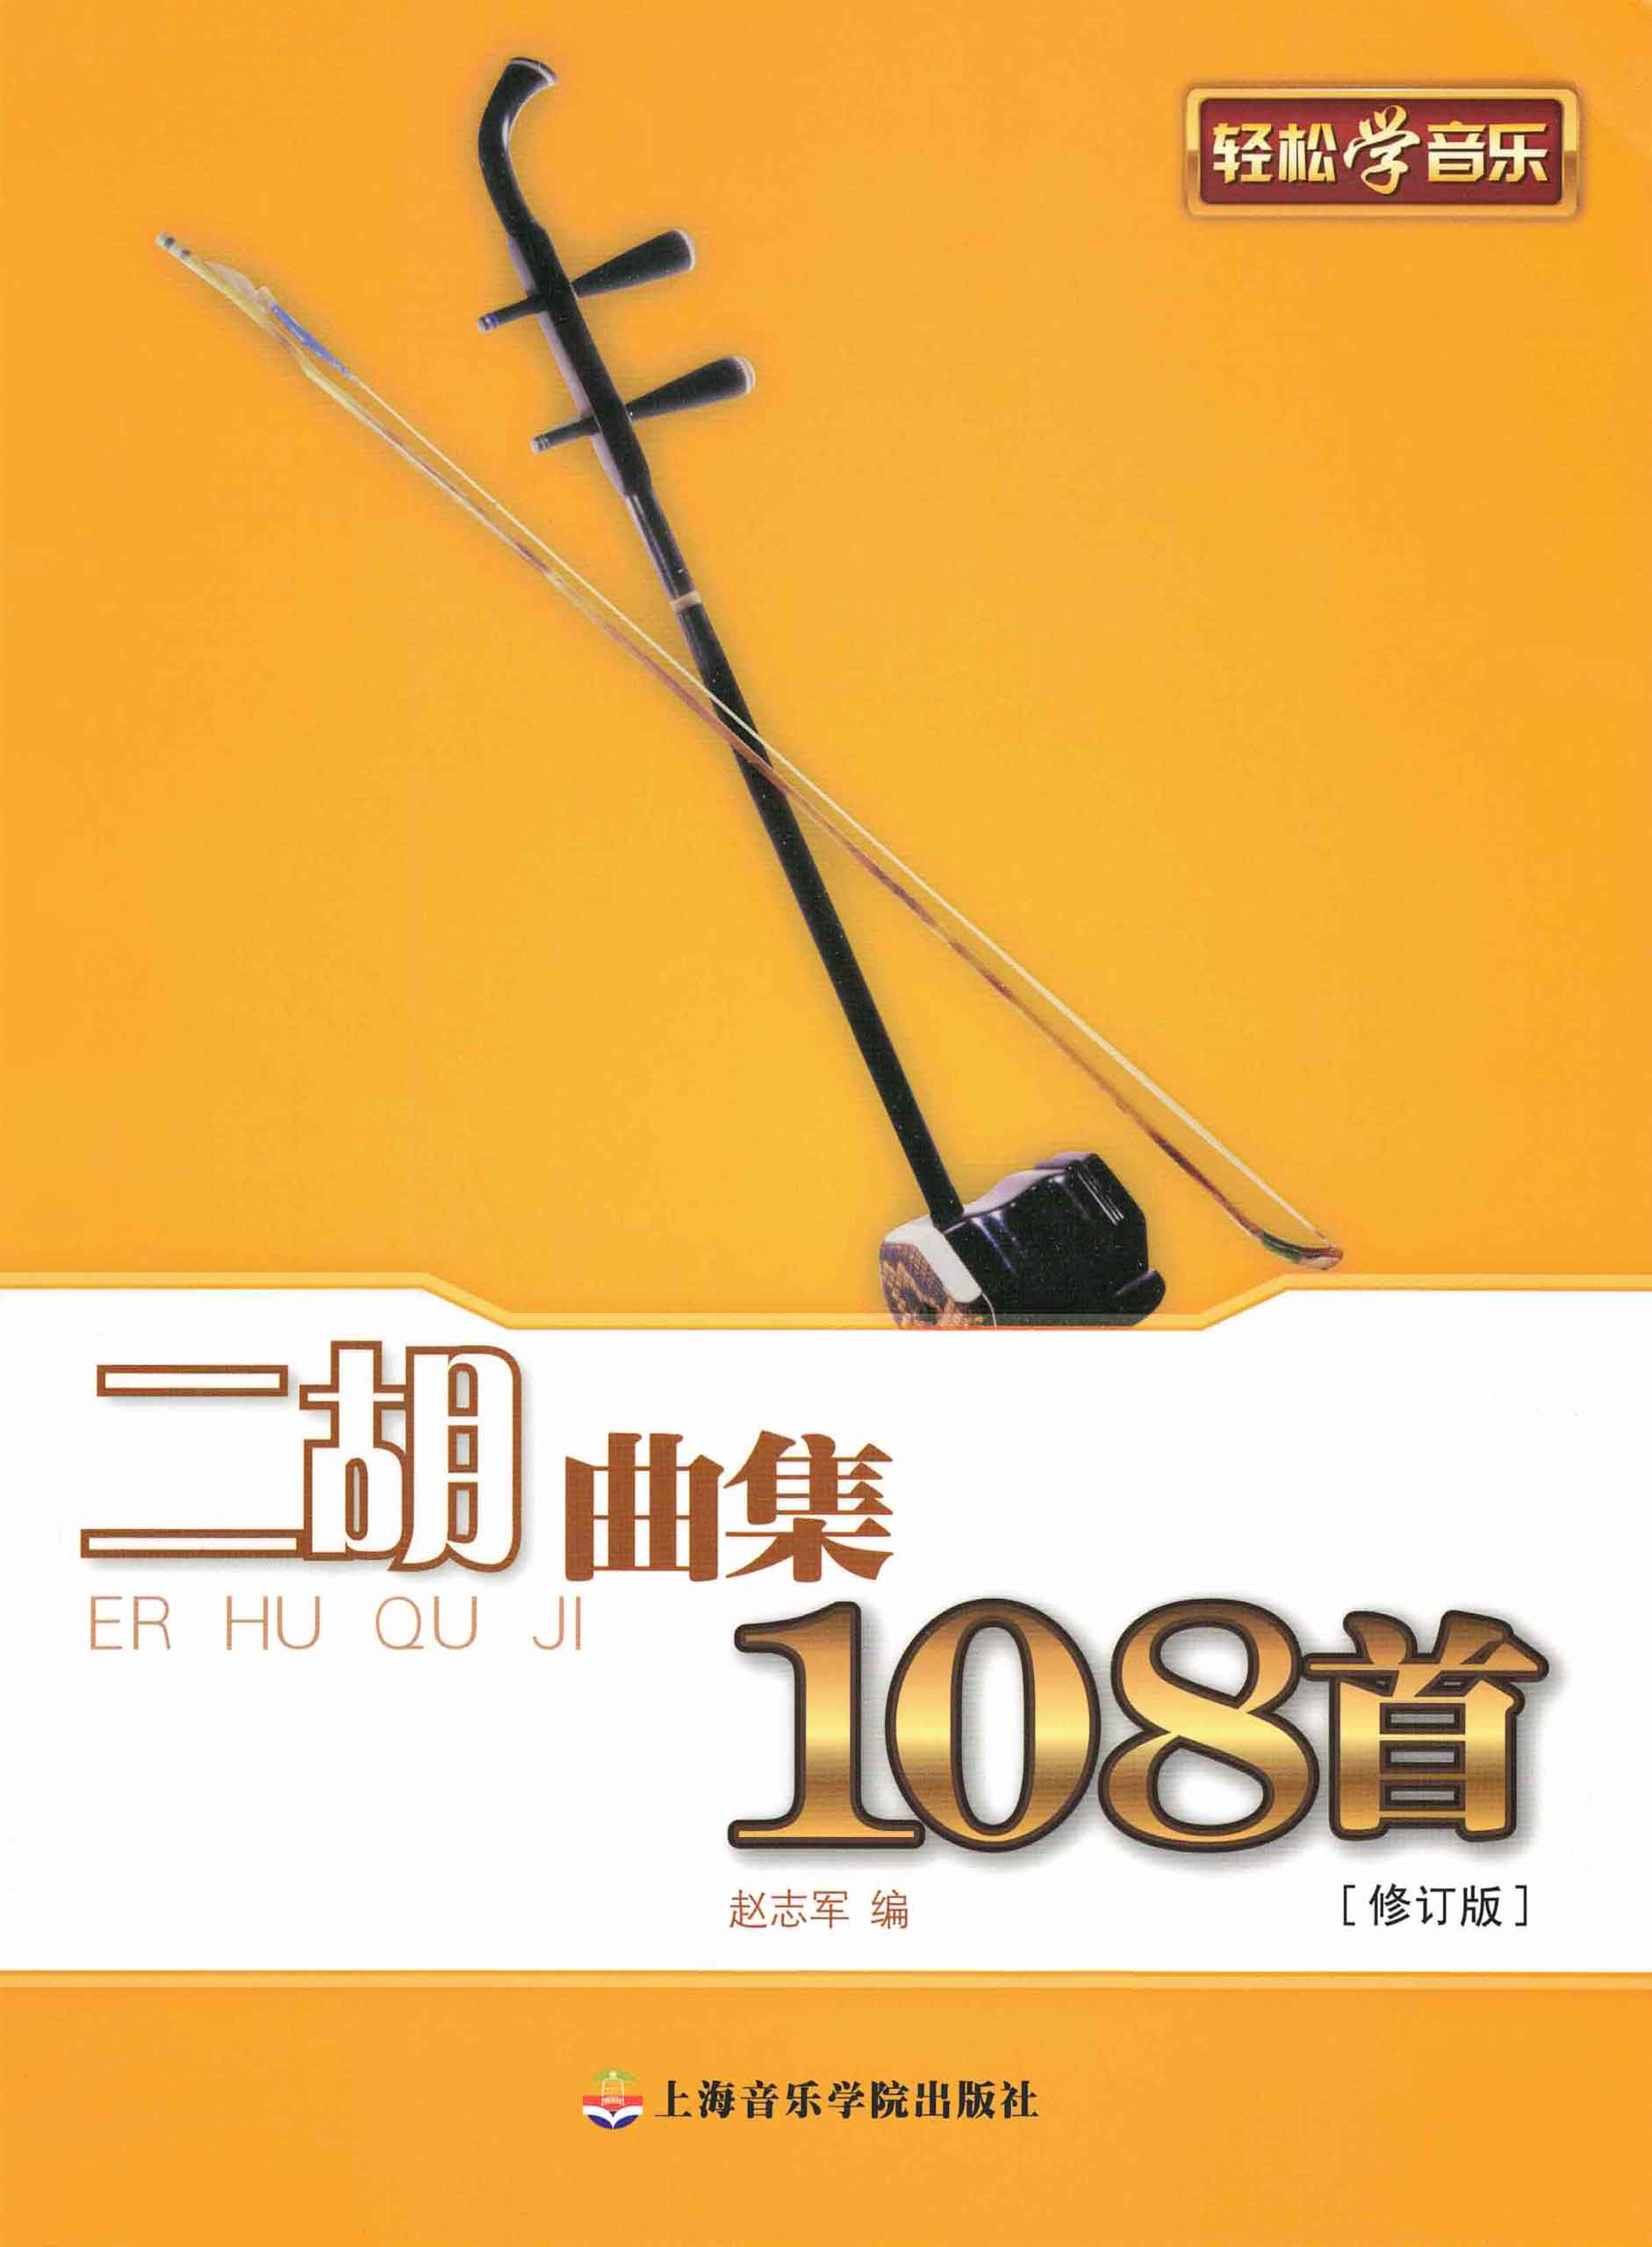 Erhu Pop Songs Book Cover Page